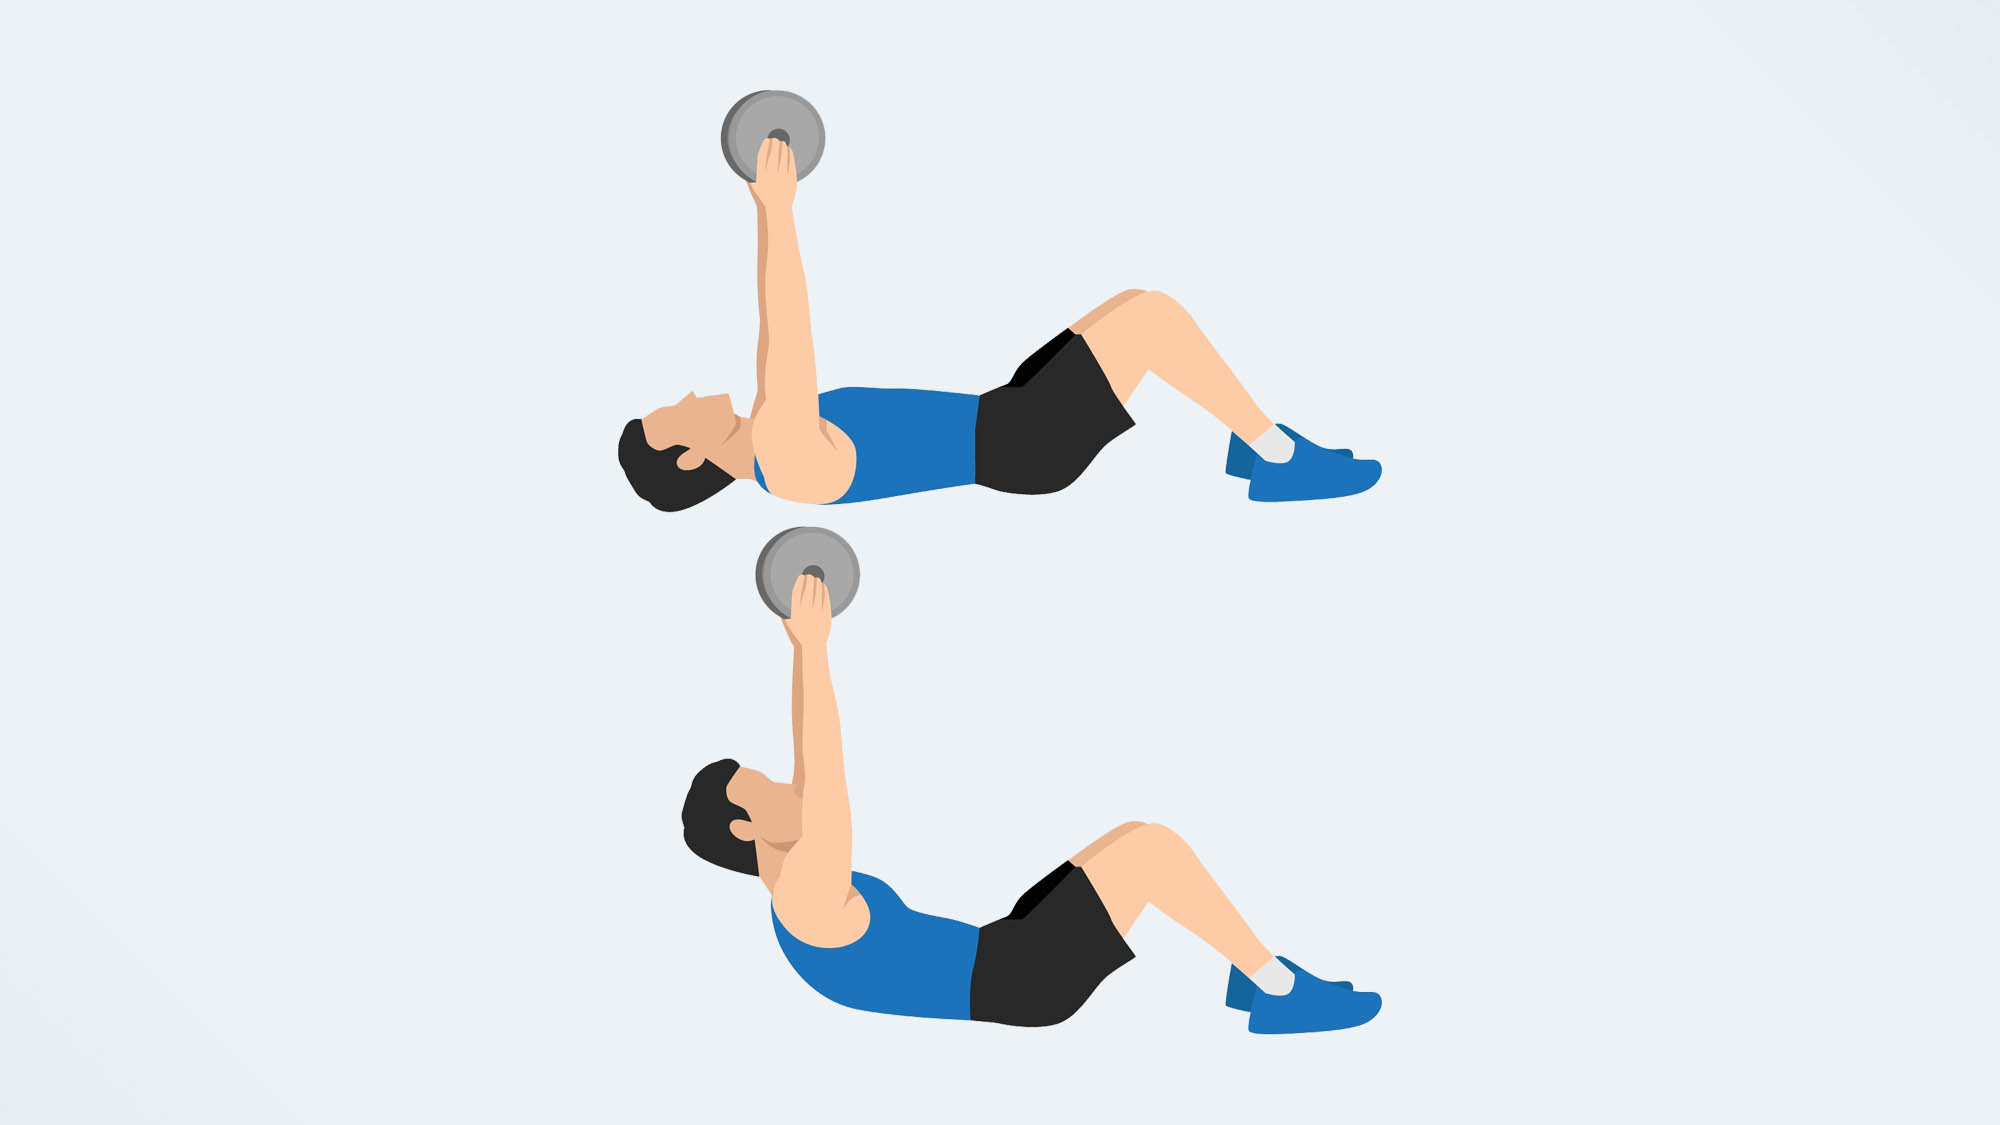 Best Dumbbell Ab Exercises For Beginners To Strengthen Your Core Tom S Guide